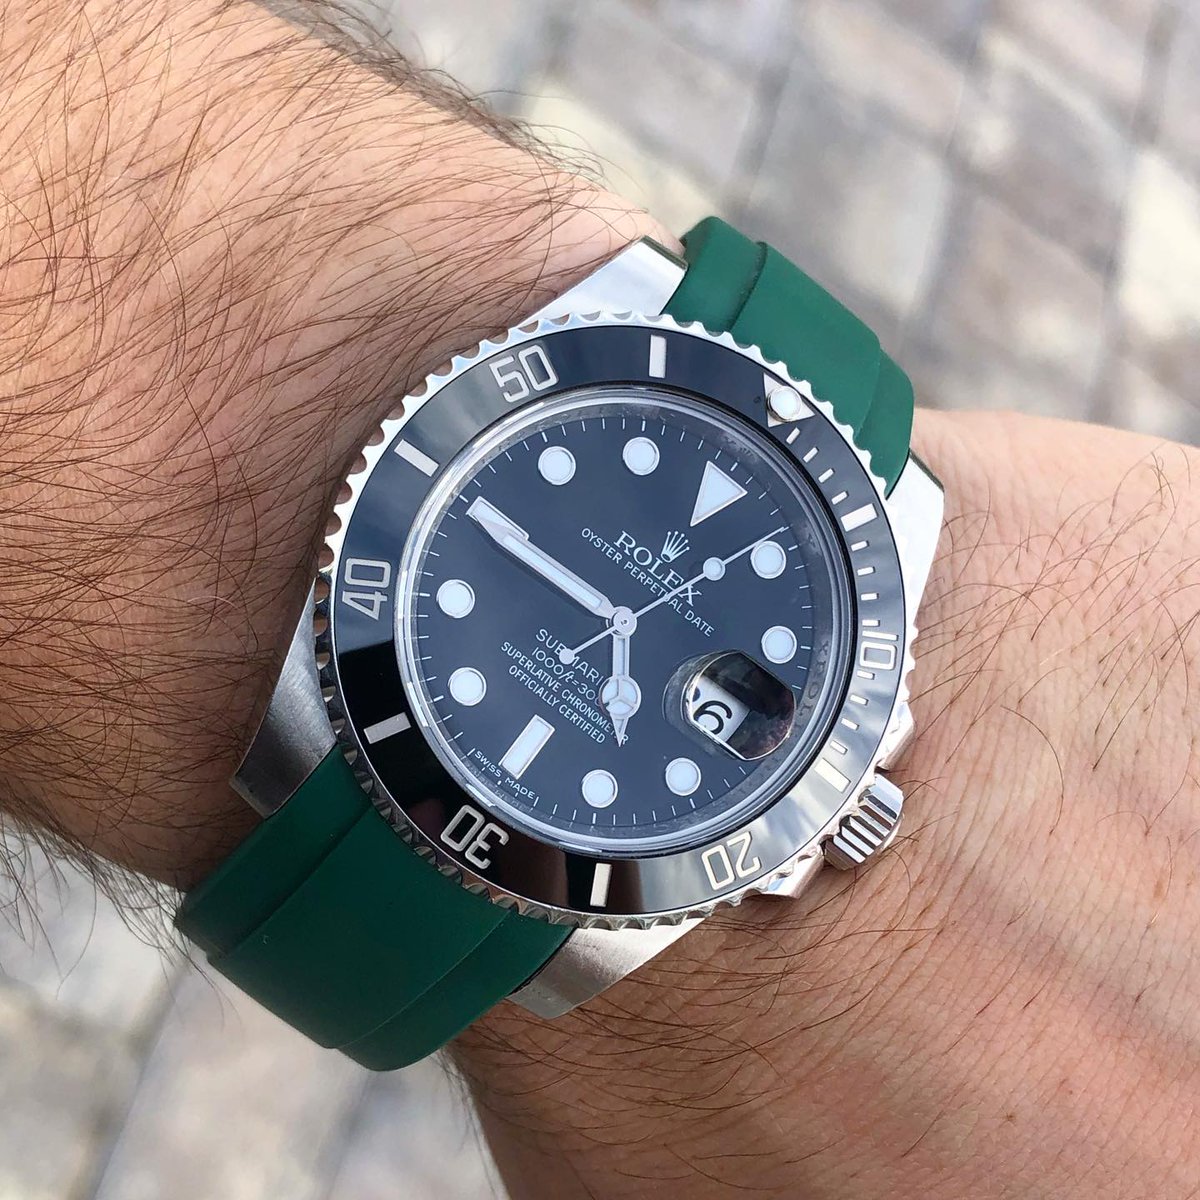 Preventie Beurs stad Best rubber straps for the Rolex Submariner on the market